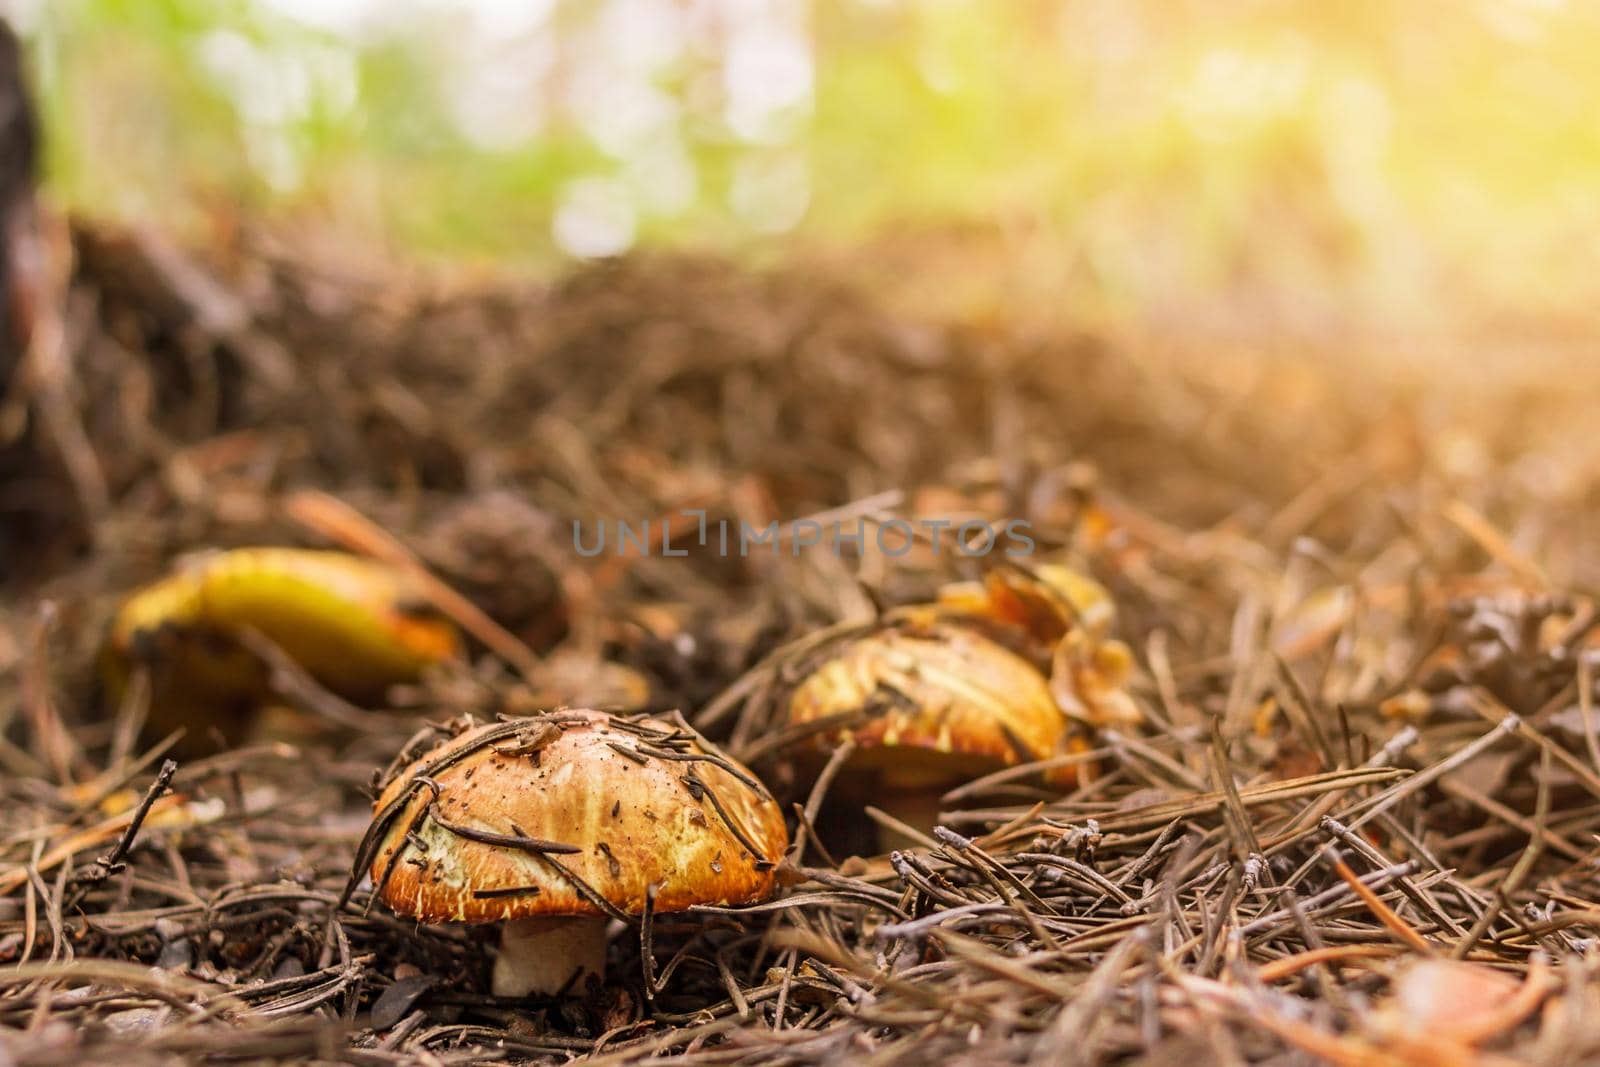 Group of mushrooms boletus, suillus luteus, grows under pine tree in fallen needles in coniferous forest, mushroom picking season, front selective focus, close up